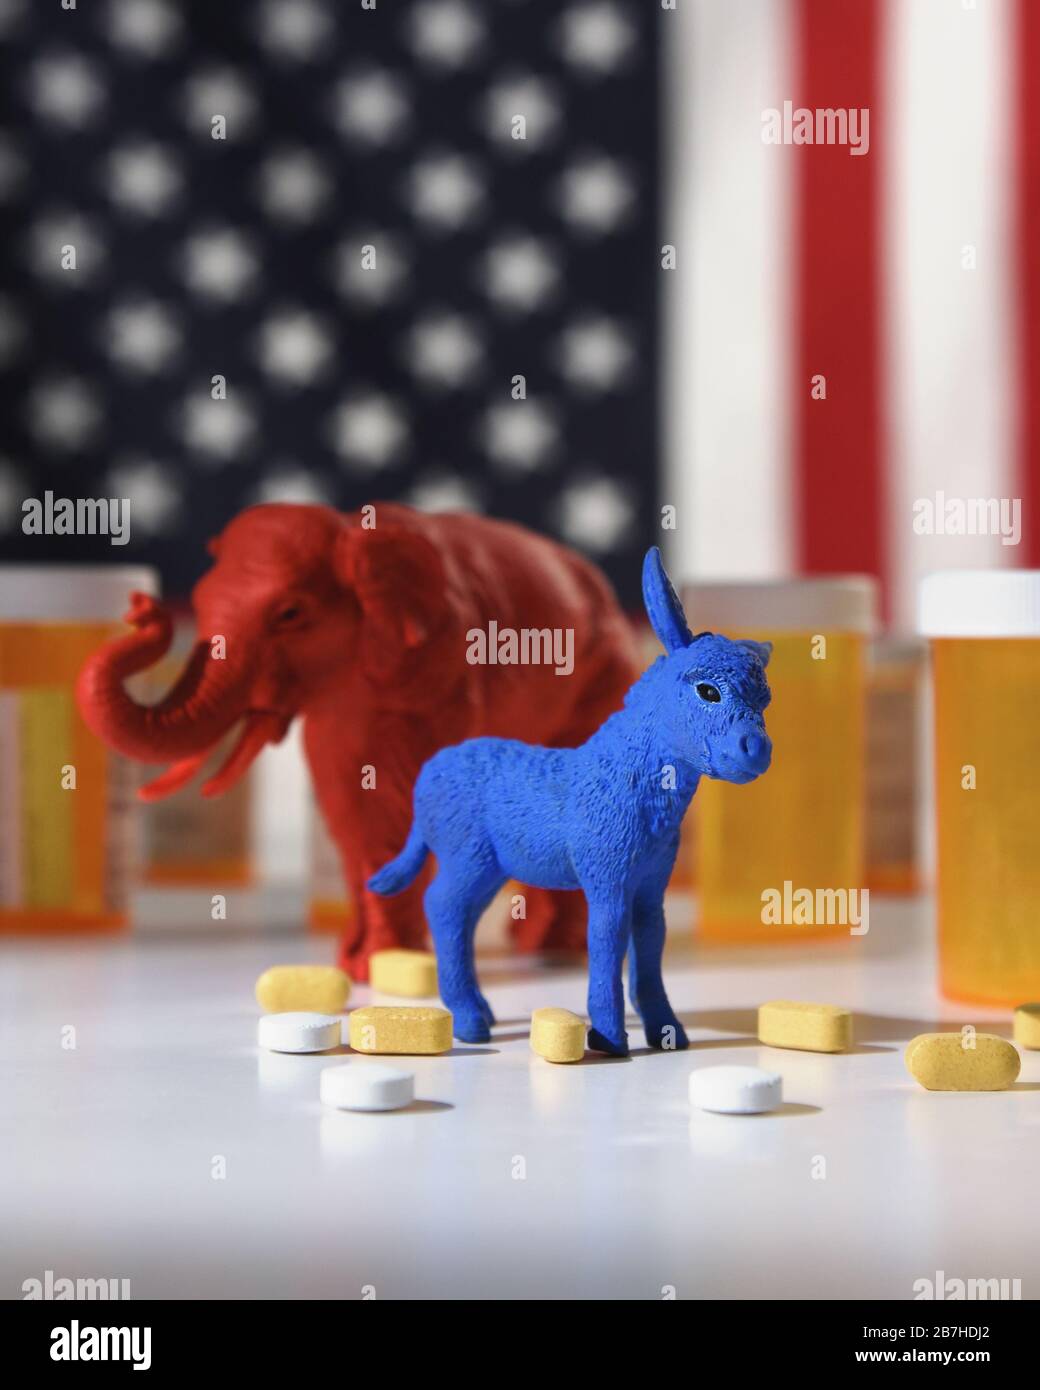 A blue donkey as a democrate and a red elephant as a replublica are against an american flag with prescription pill bottles for a medical cost concept Stock Photo